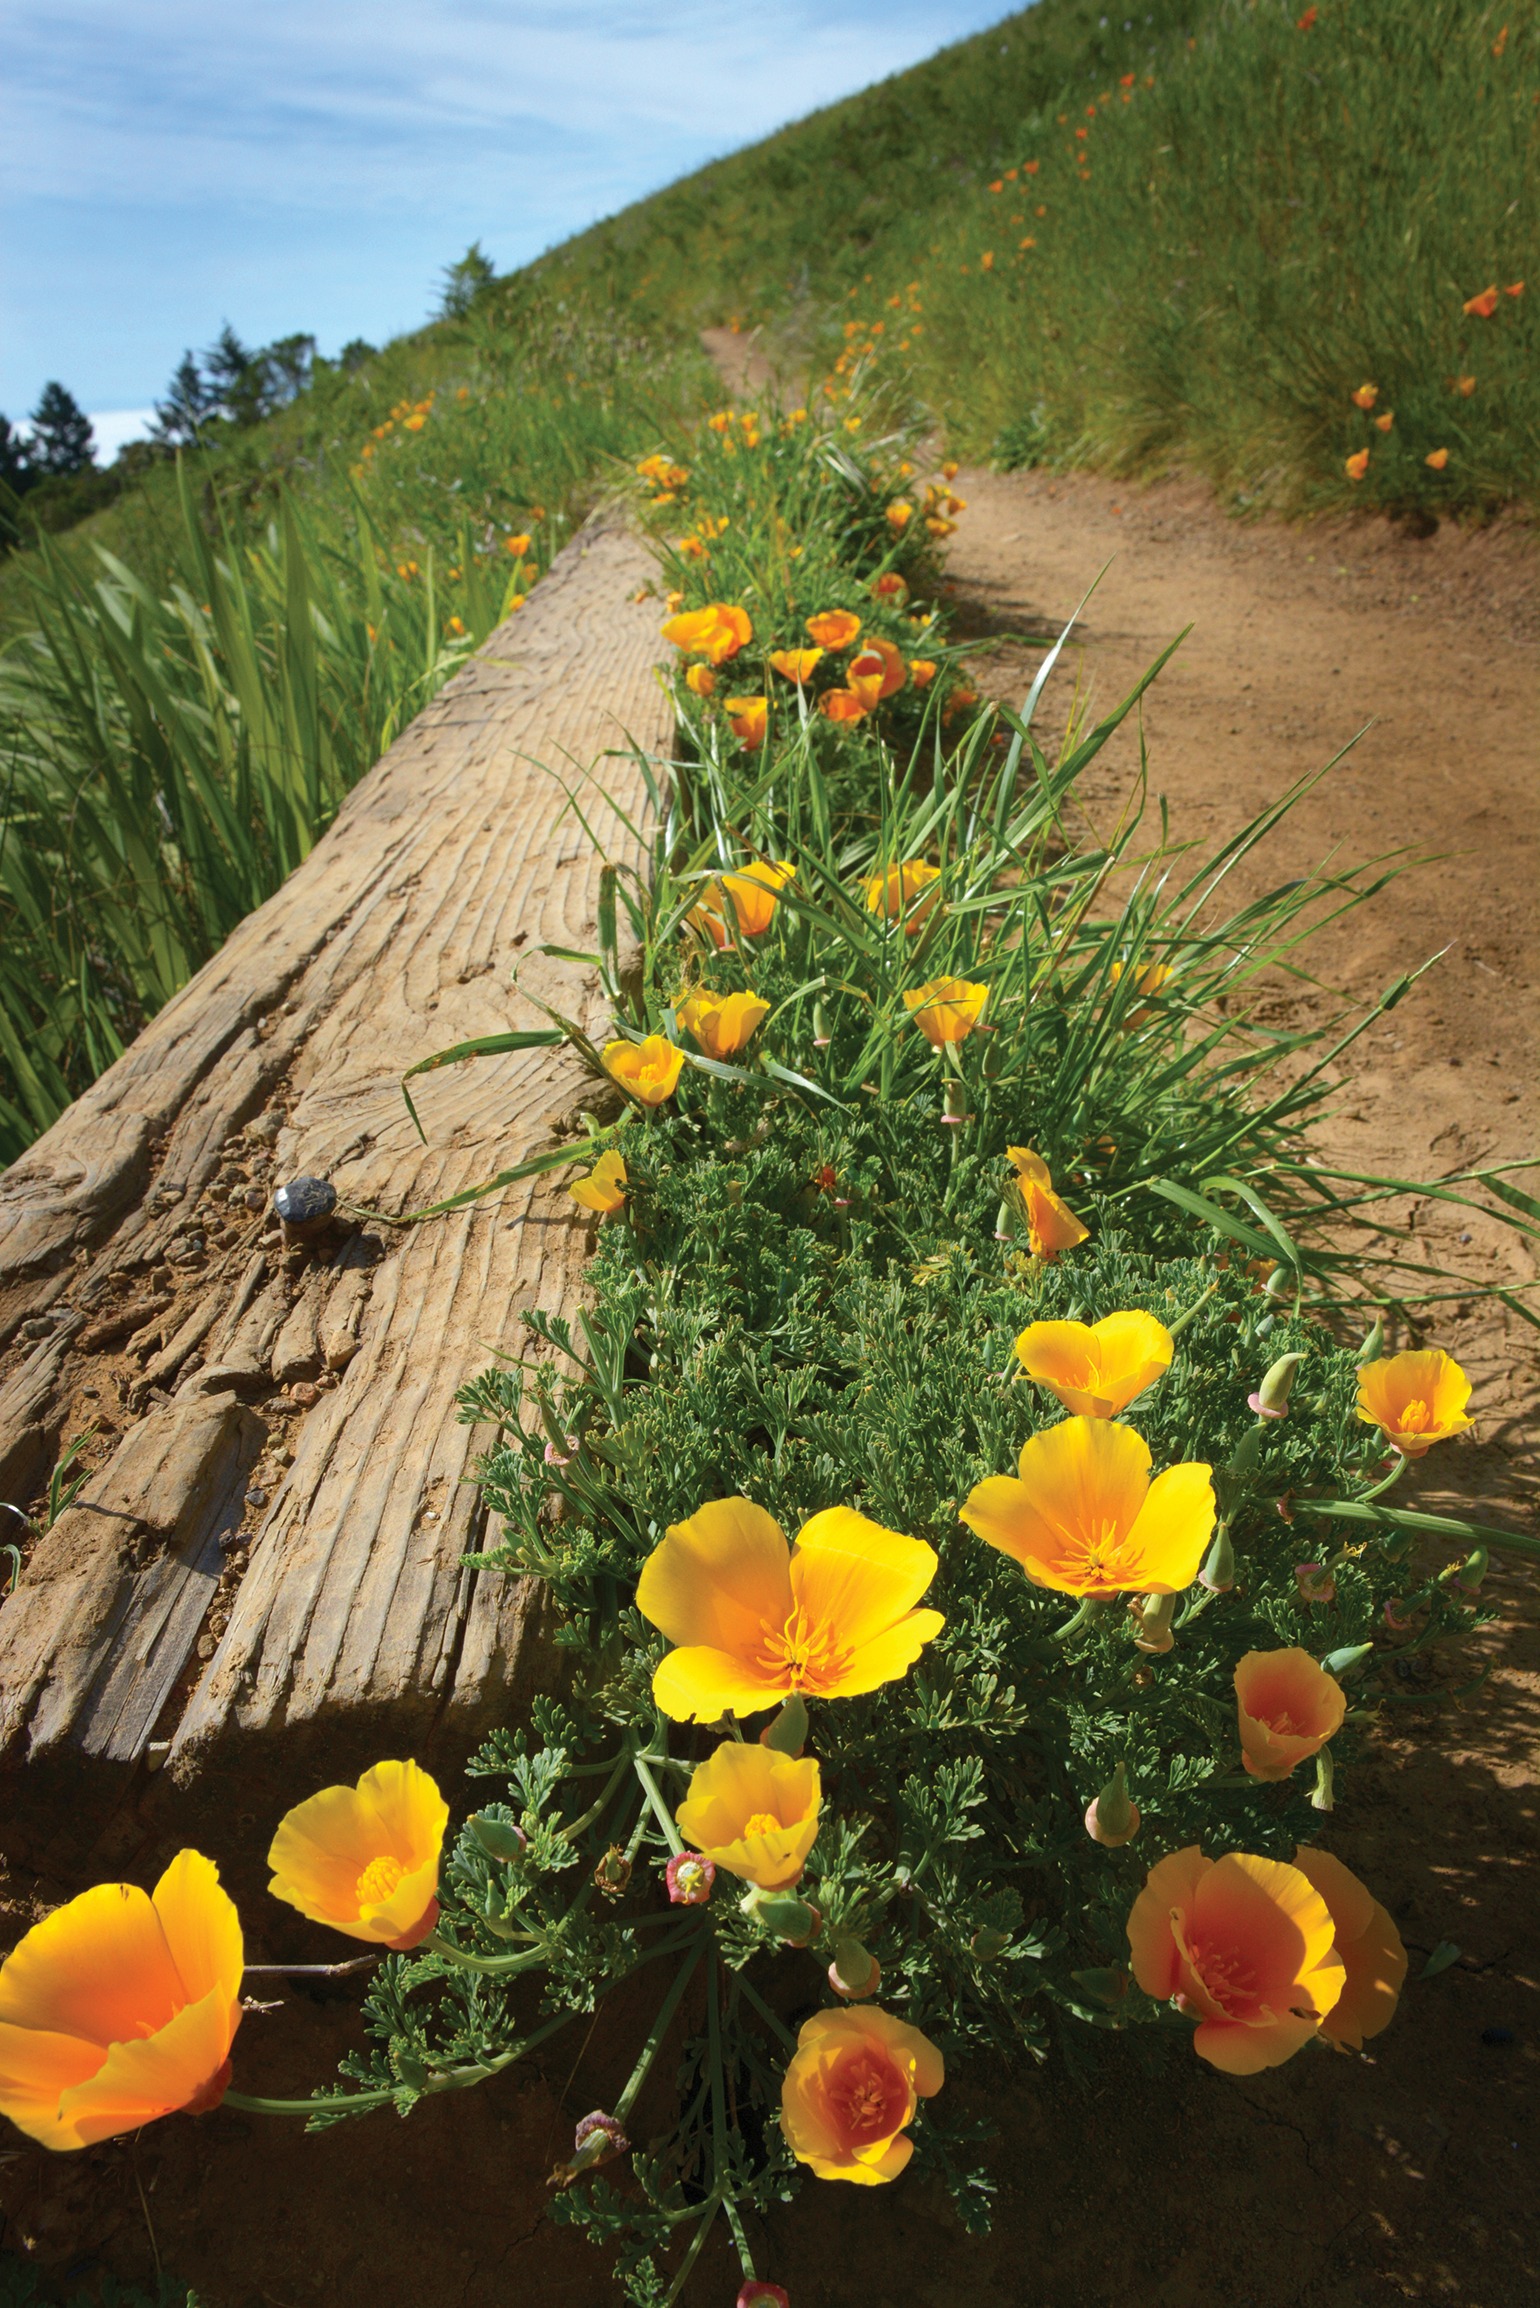 Download Flowers To Look Out For On Your Next Marin Hike Our Guide To Local Wildflowers Marin Magazine